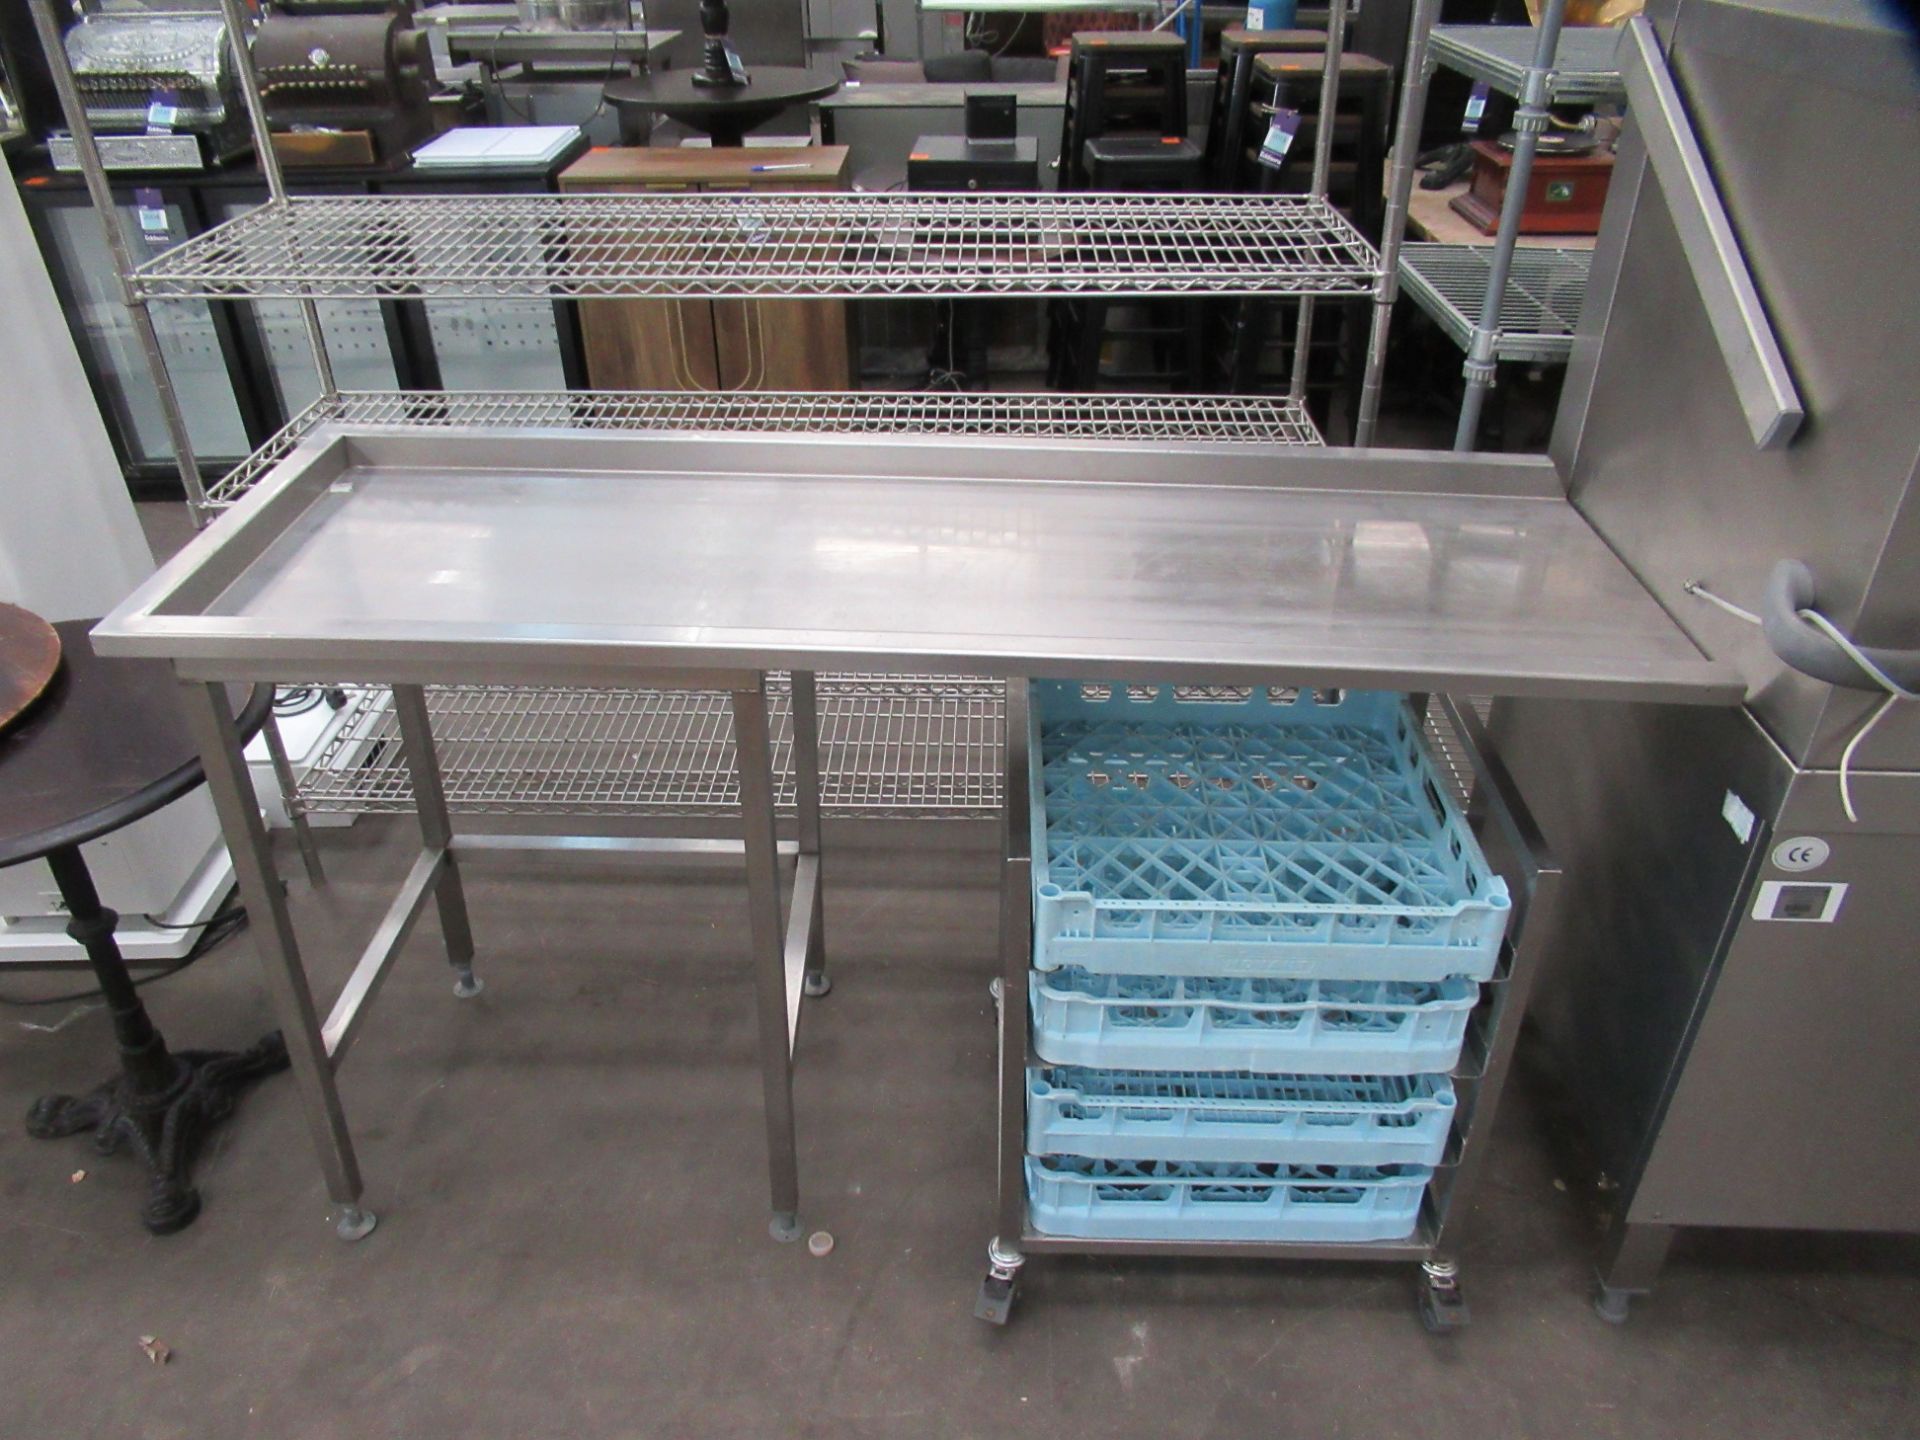 Winterhalter Commercial Dishwasher with Sink unit, Collection Table and Tray Storage Unit - Image 5 of 11